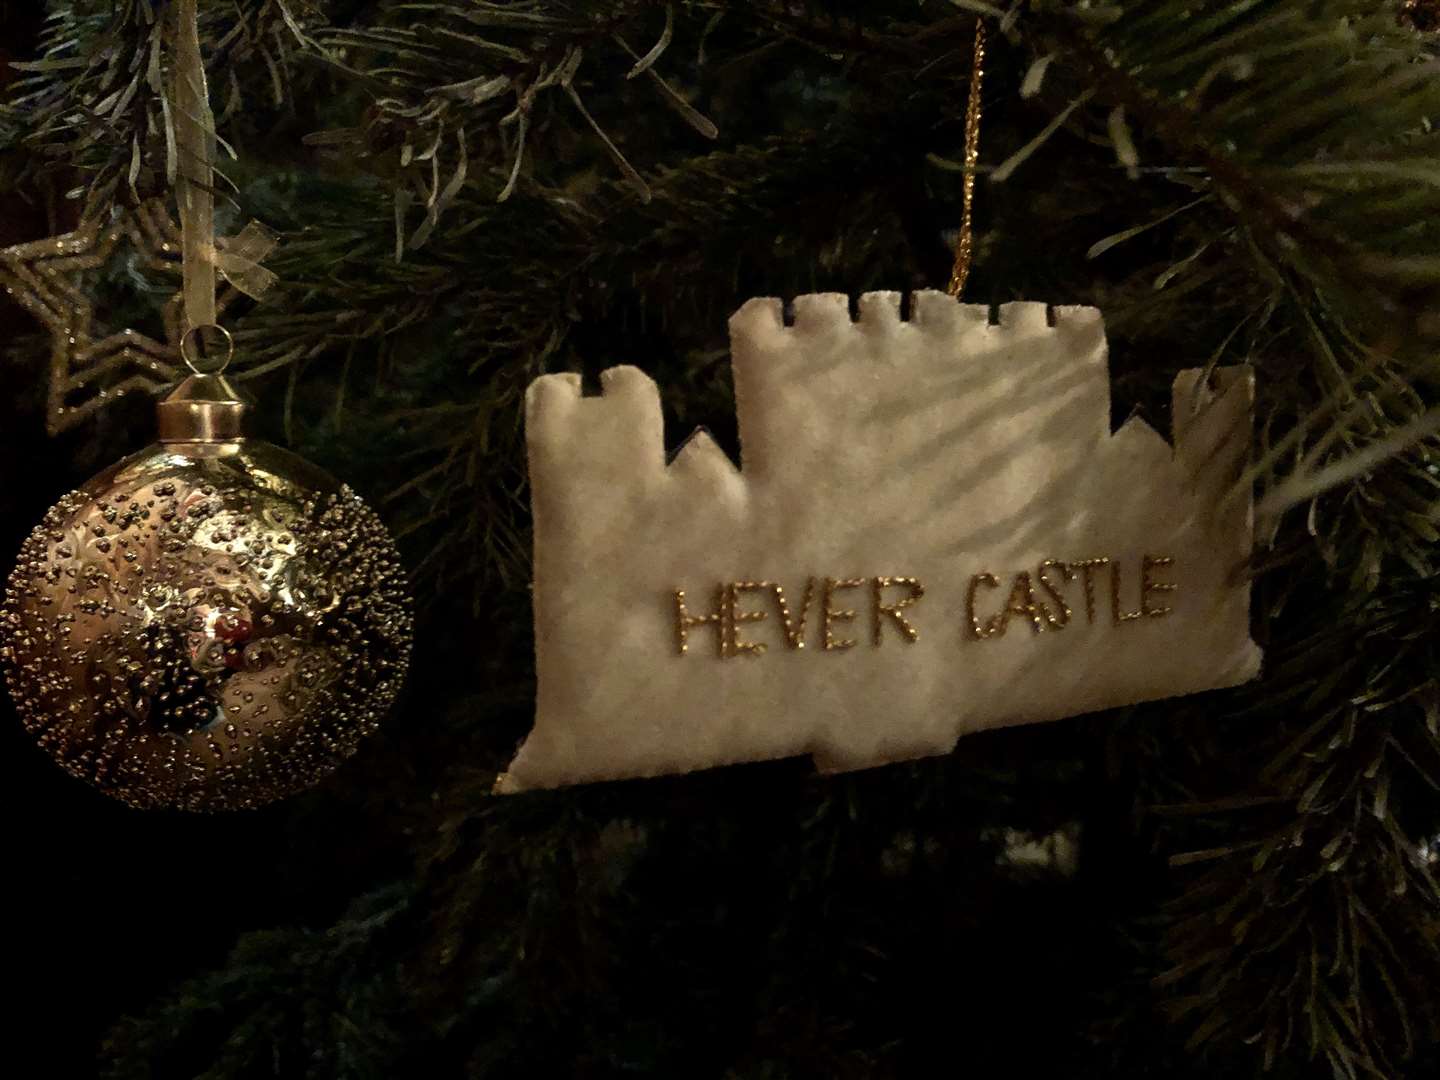 There are some beautifully decorated trees at Hever Castle